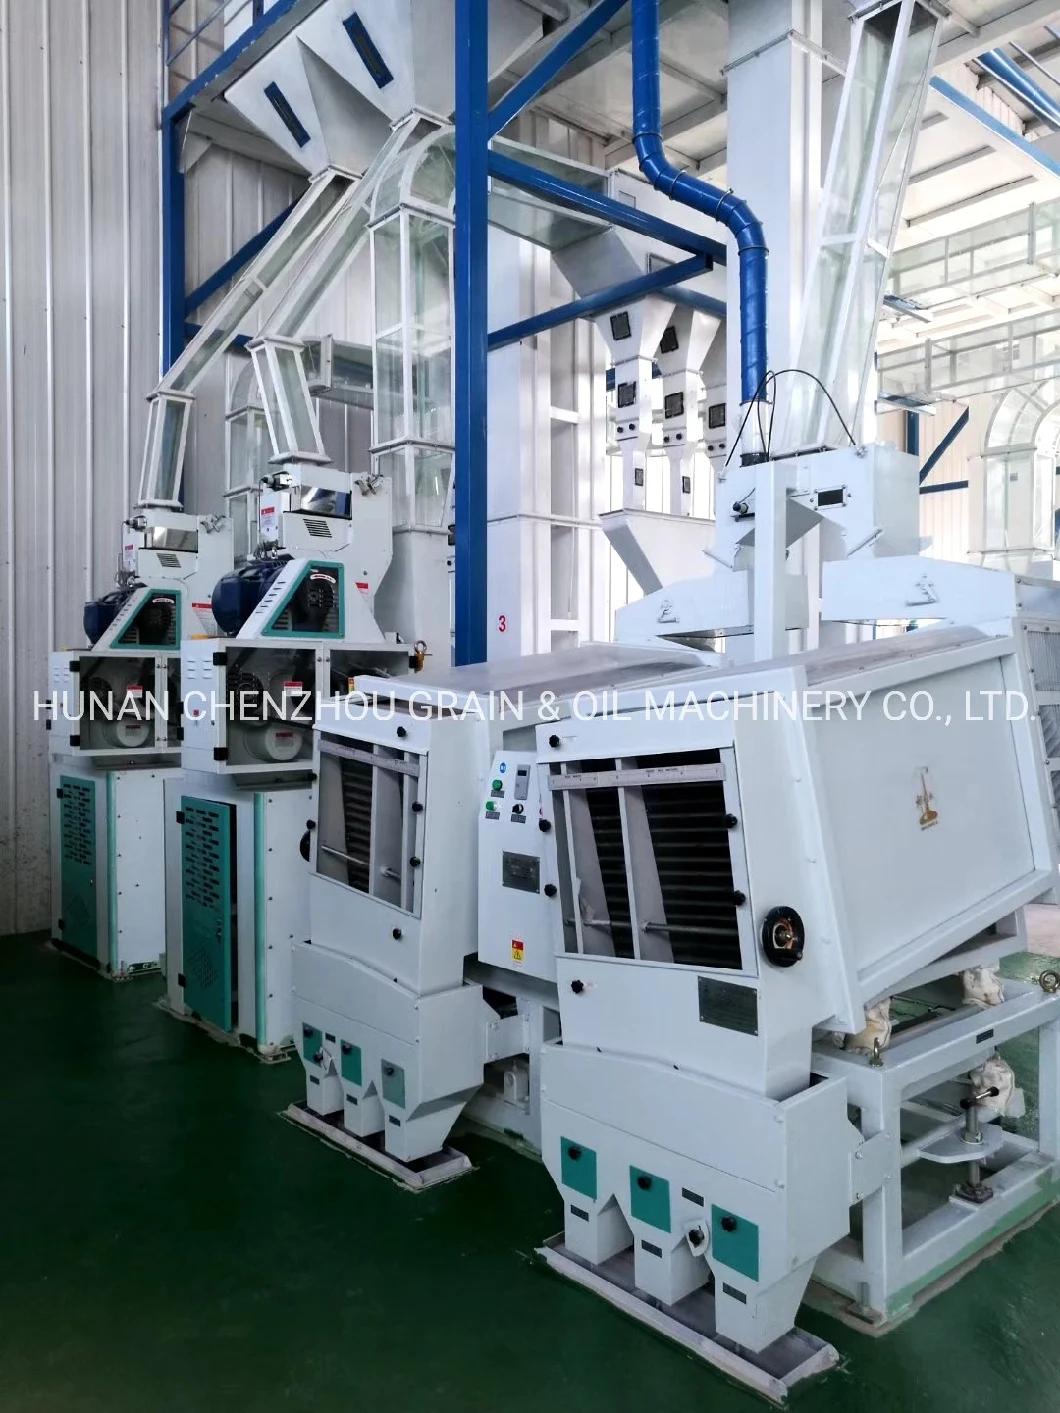 Clj 1000 Tons Per Day Turn Key Complete Set Rice Milling Machine in Egypt